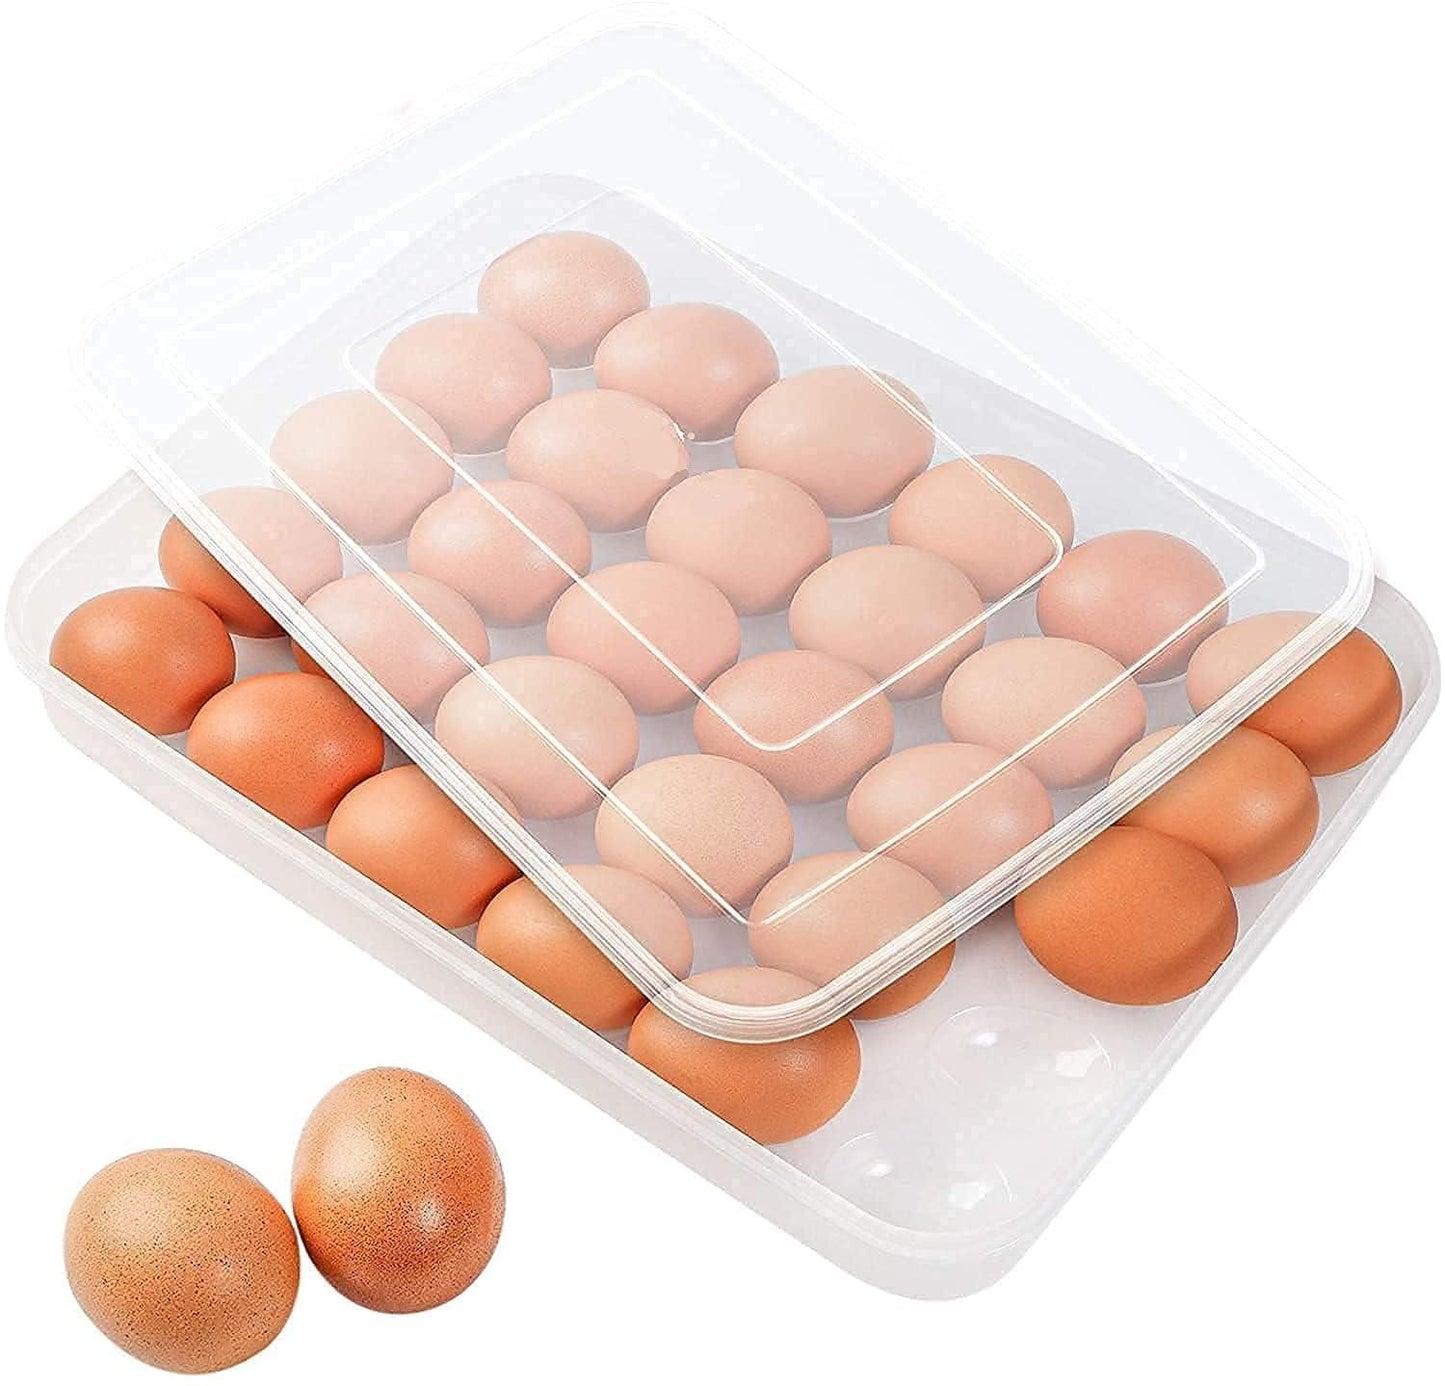 Transparent 24 Grid Egg Storage Airtight Container Tray (Pack of 1)